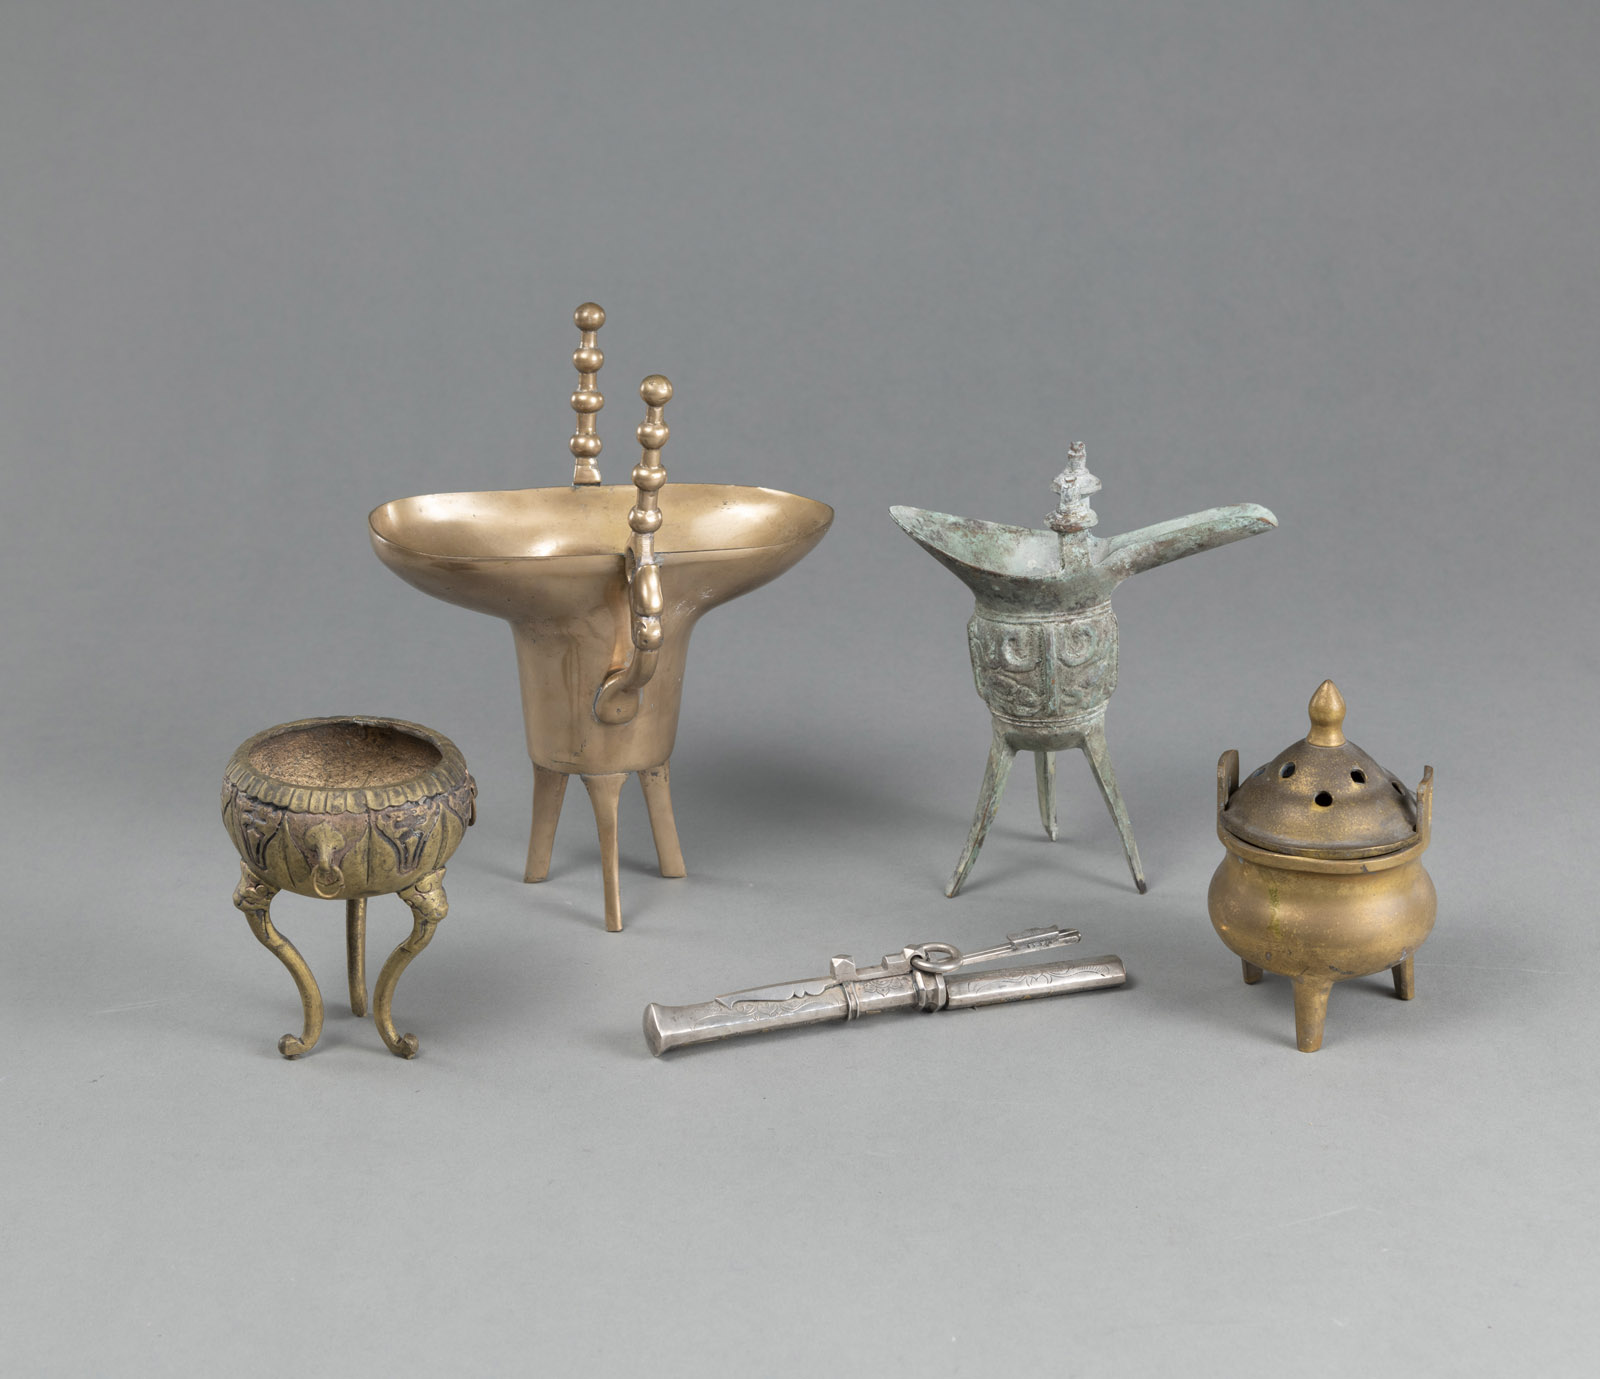 <b>TWO 'JUE' CUPS, TWO INCENSE BURNERS AND A KNIFE WITH CHOPSTICKS</b>